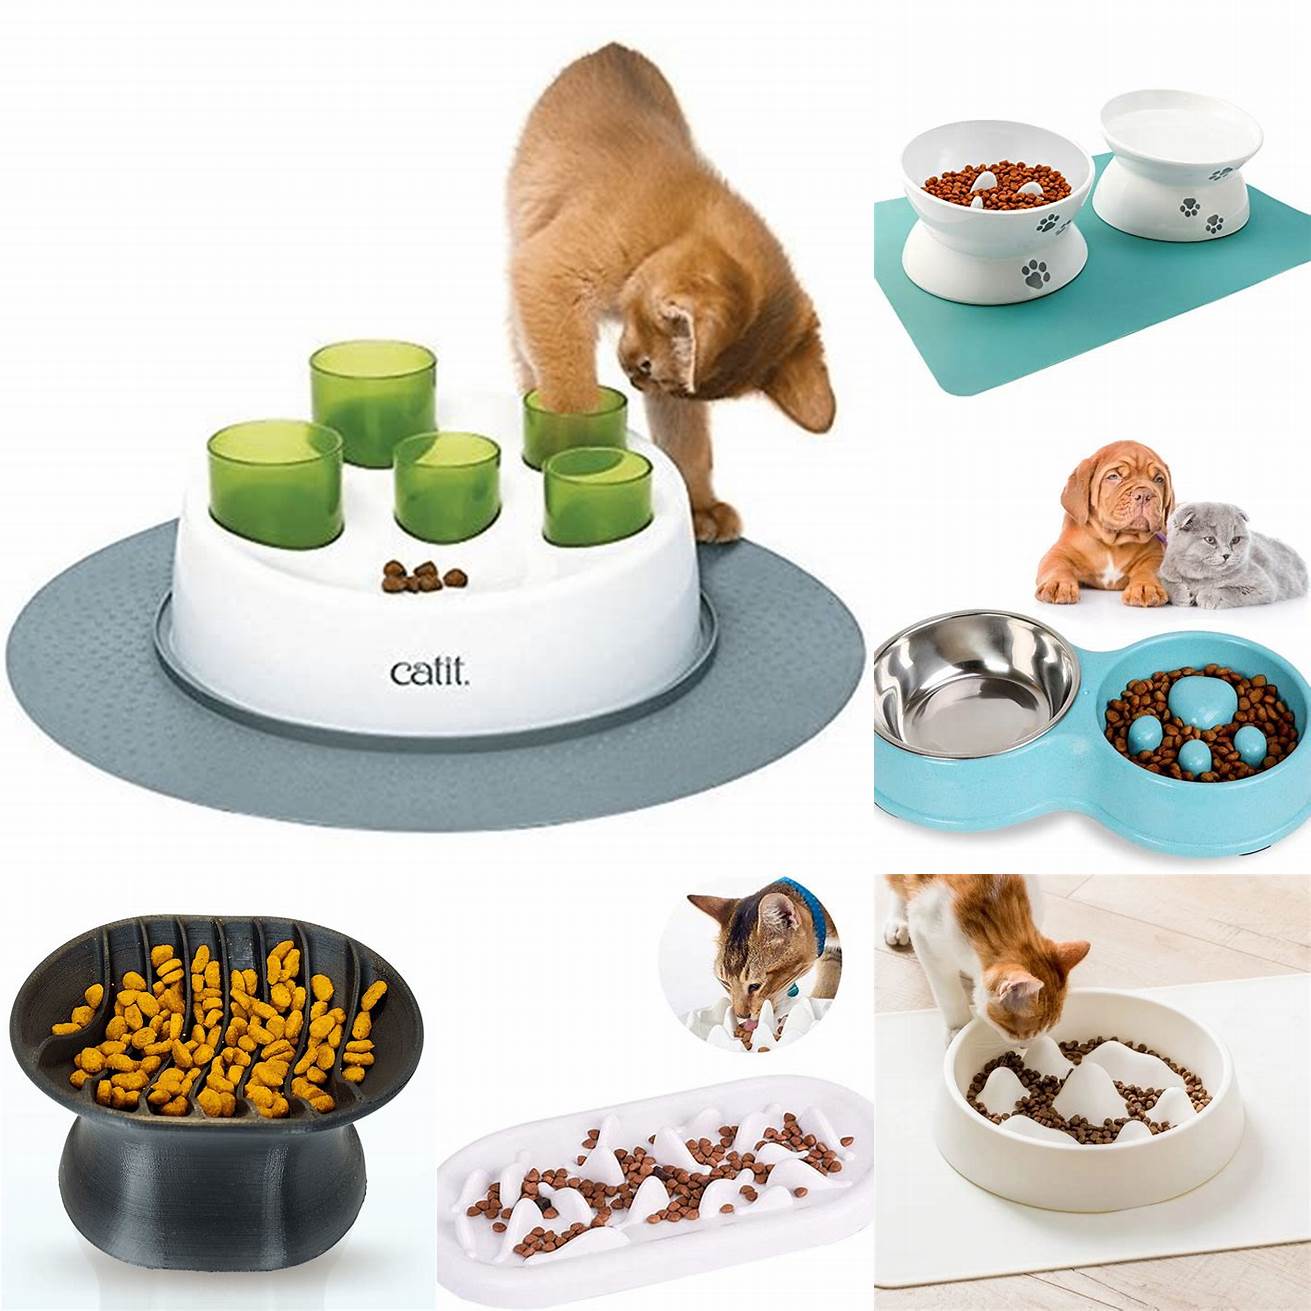 Slow feeder bowls These bowls have ridges or obstacles that make it more difficult for cats to eat their food quickly